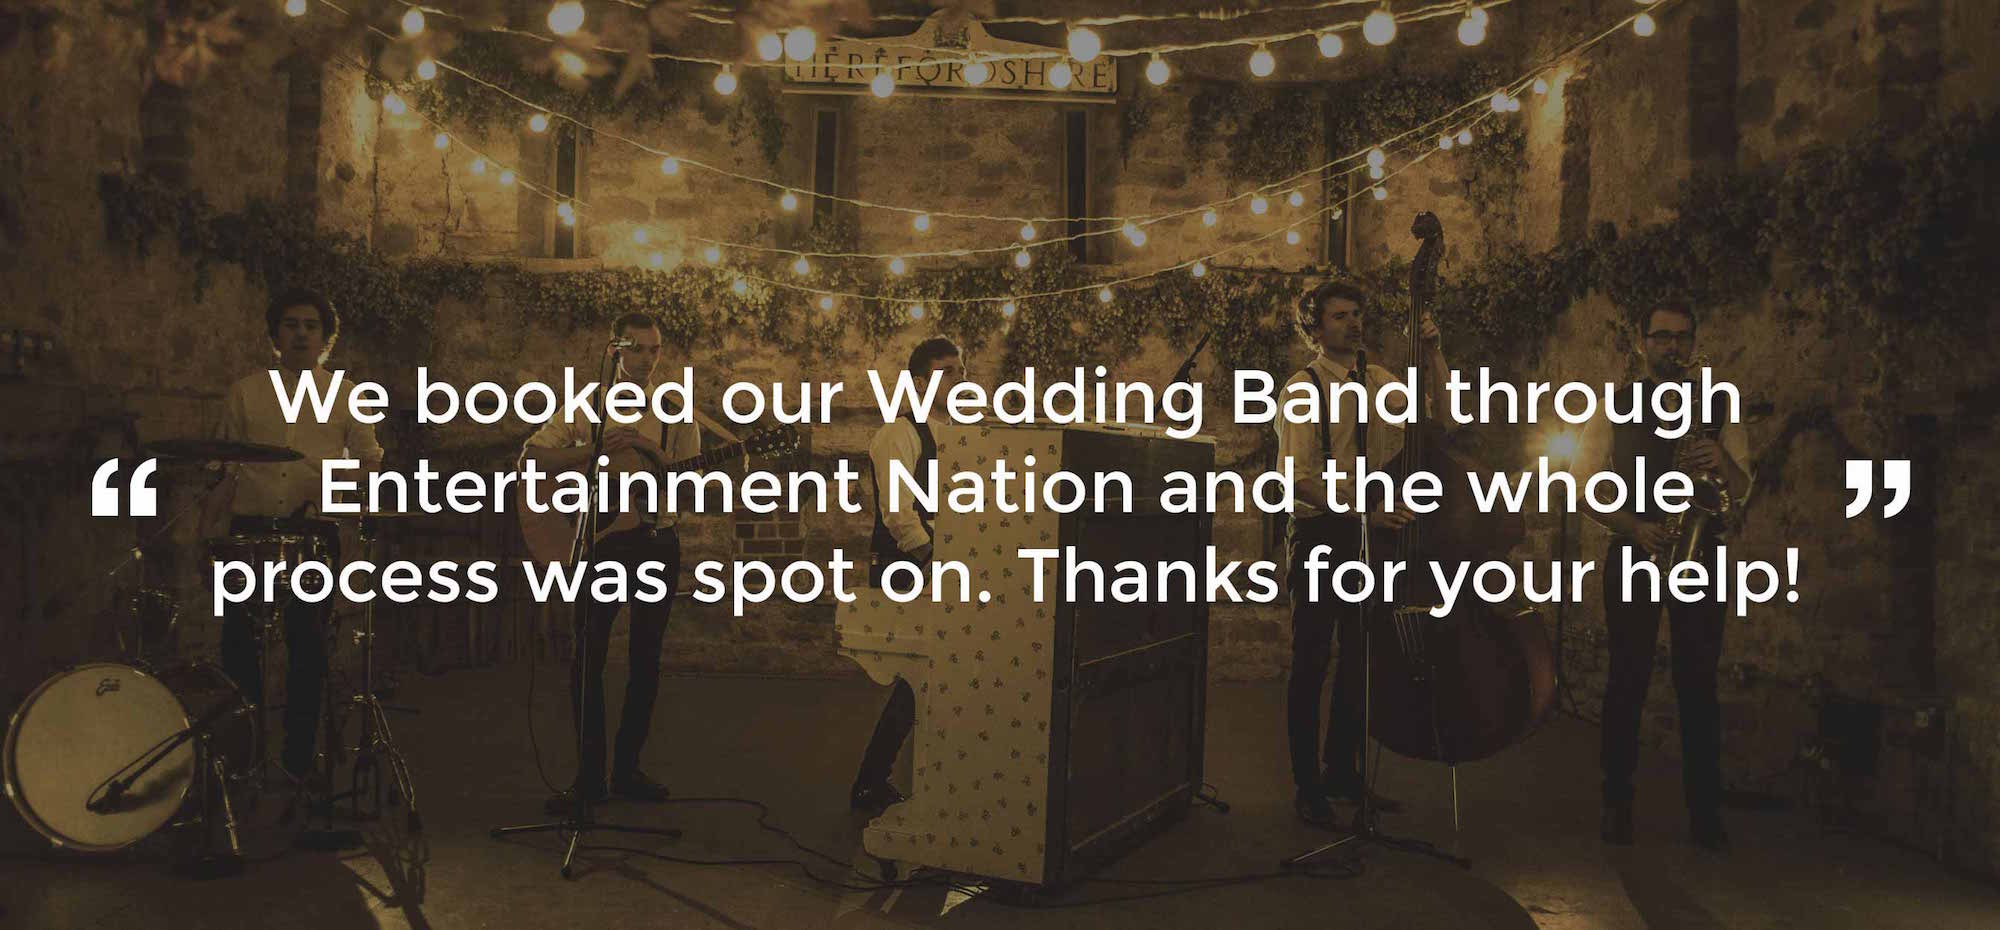 Review of Wedding Band Cardiff